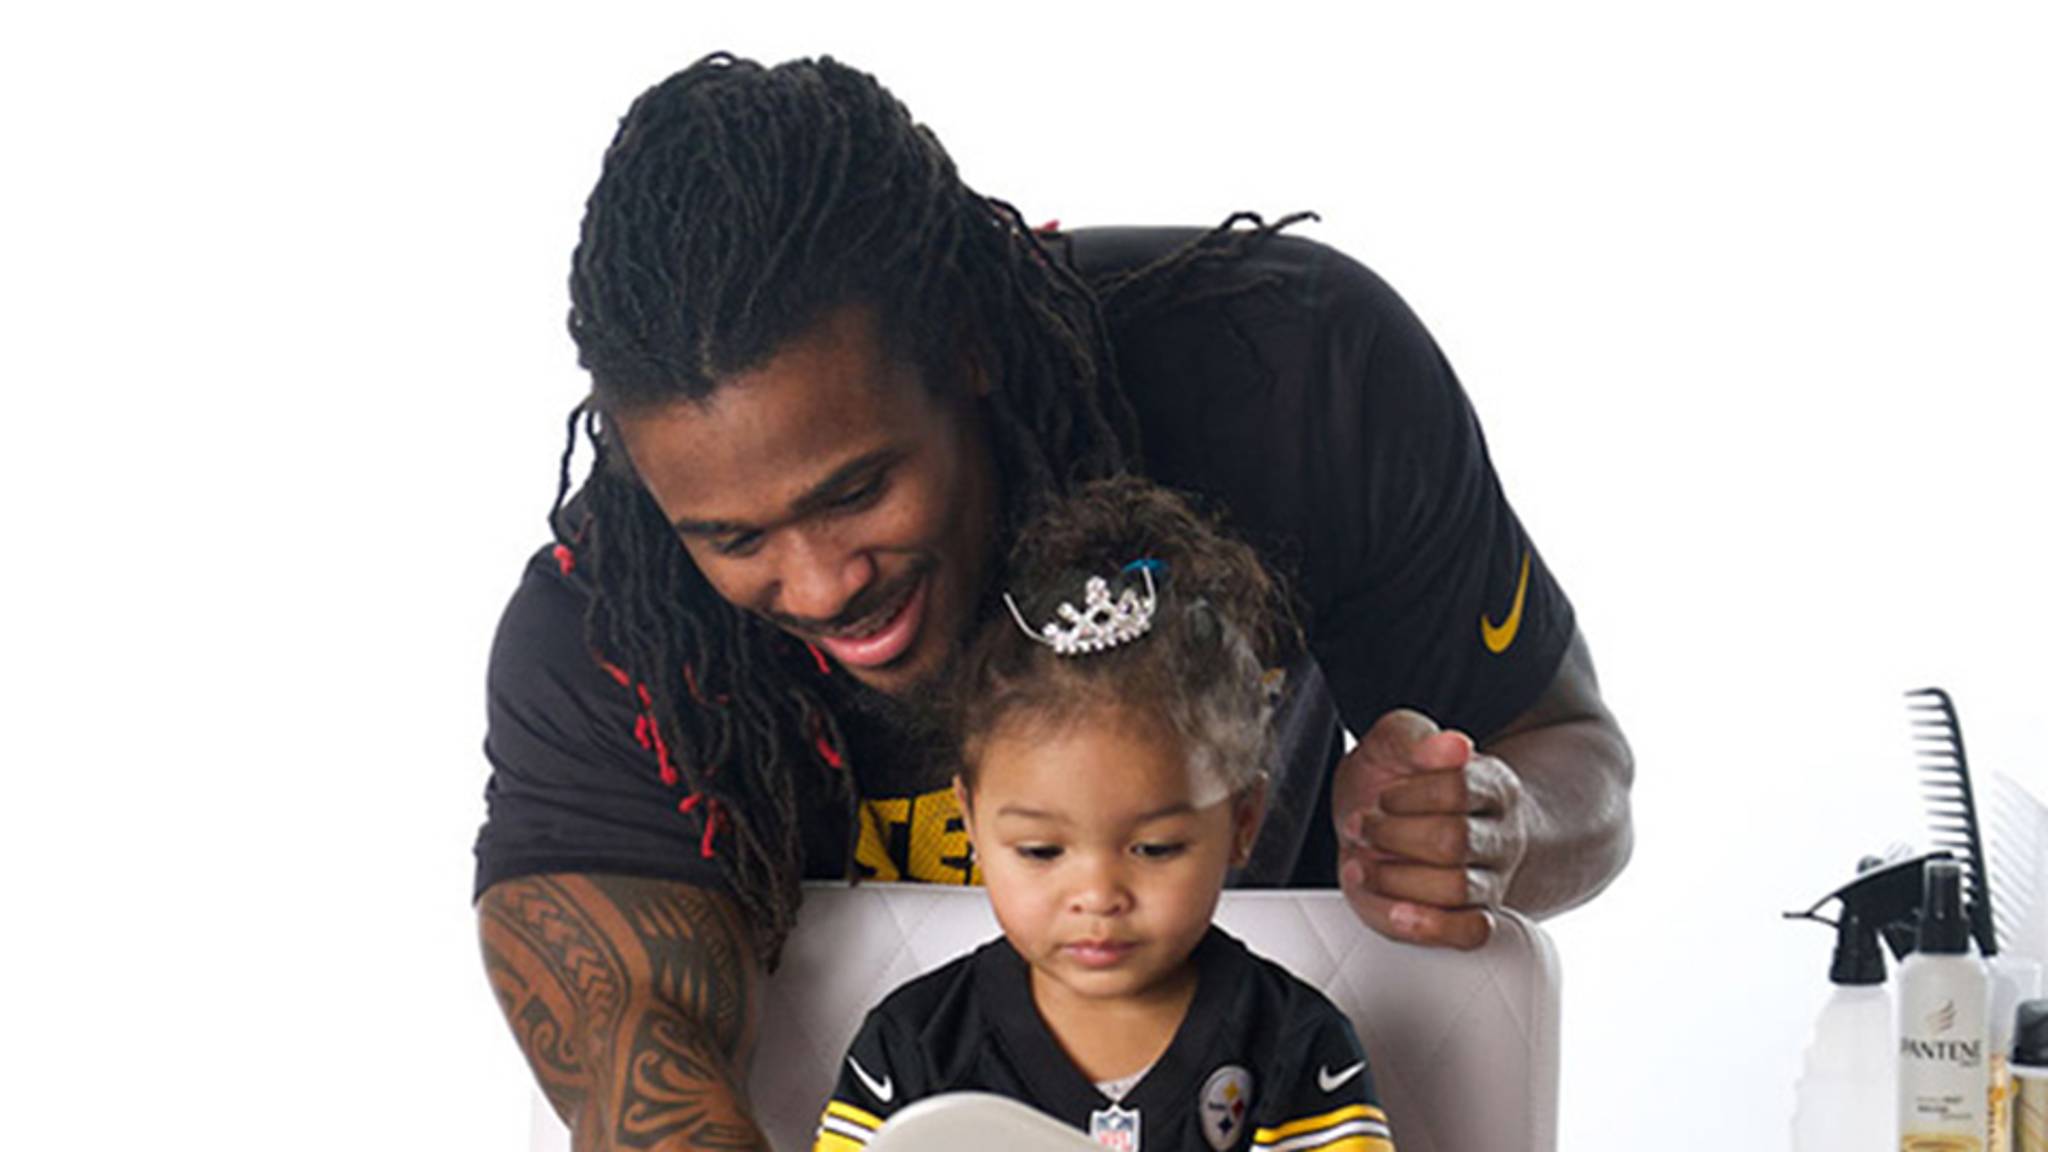 Pantene encourages dads to hang with their daughters